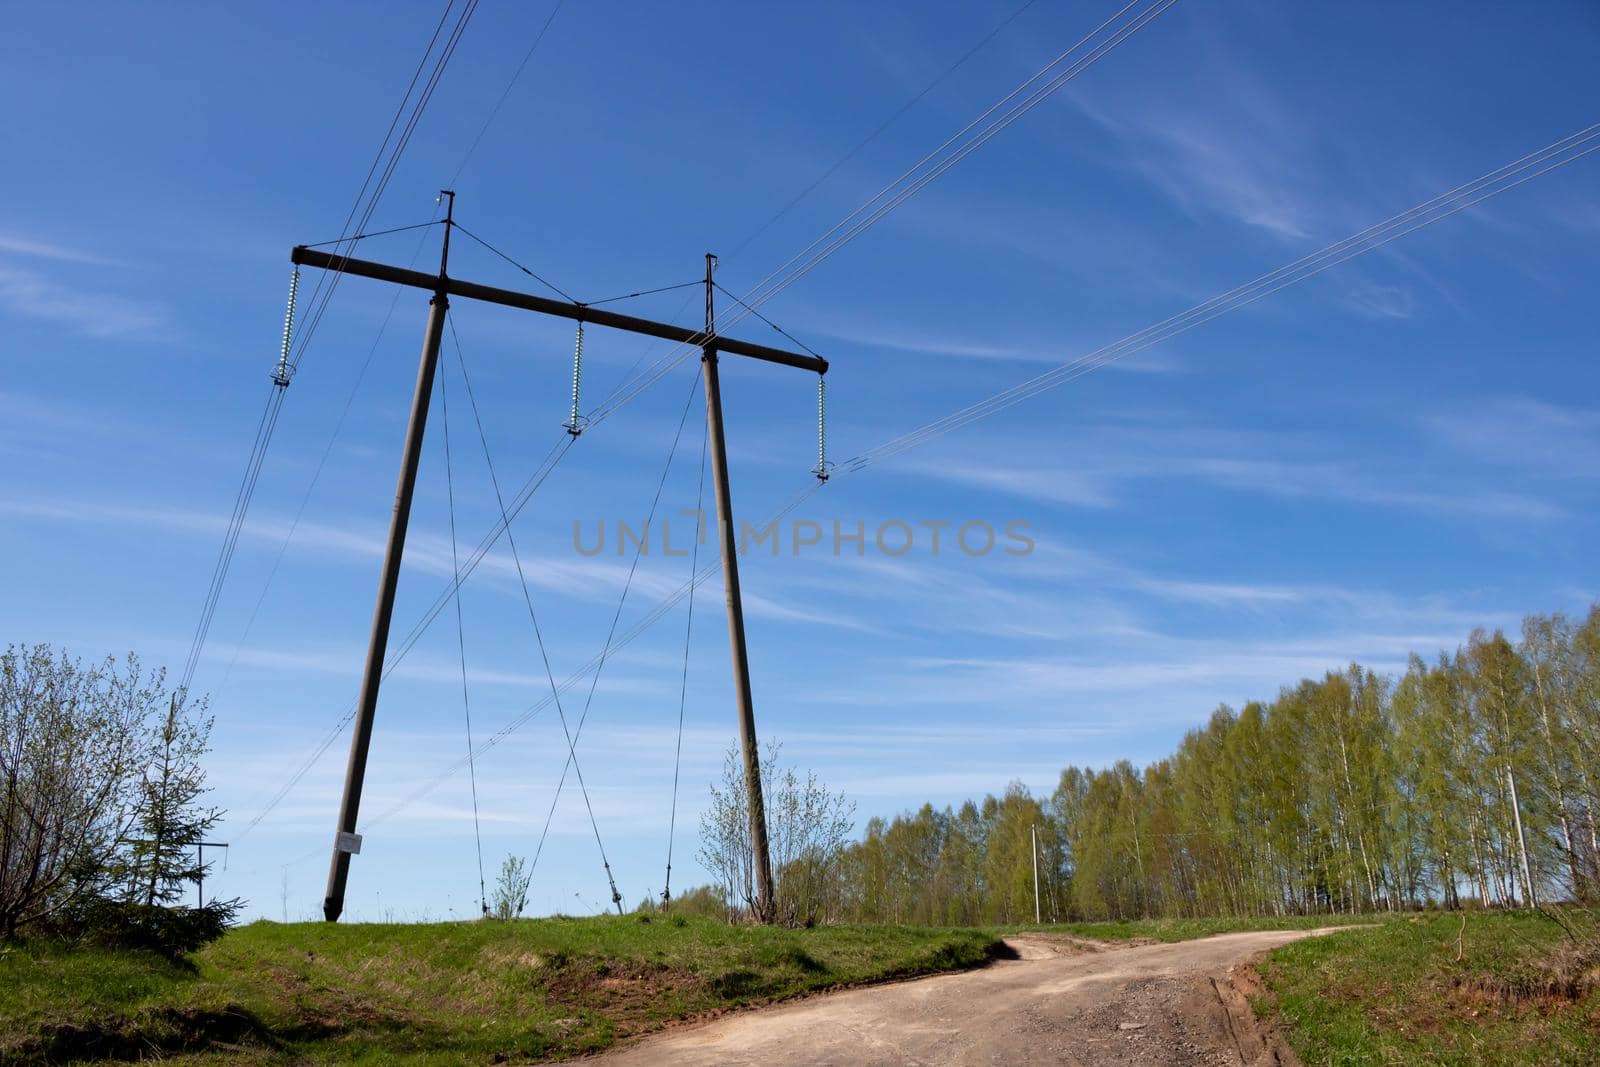 Transmission tower, or power line, in front of a clear blue sky, on a Sunny day. by lapushka62